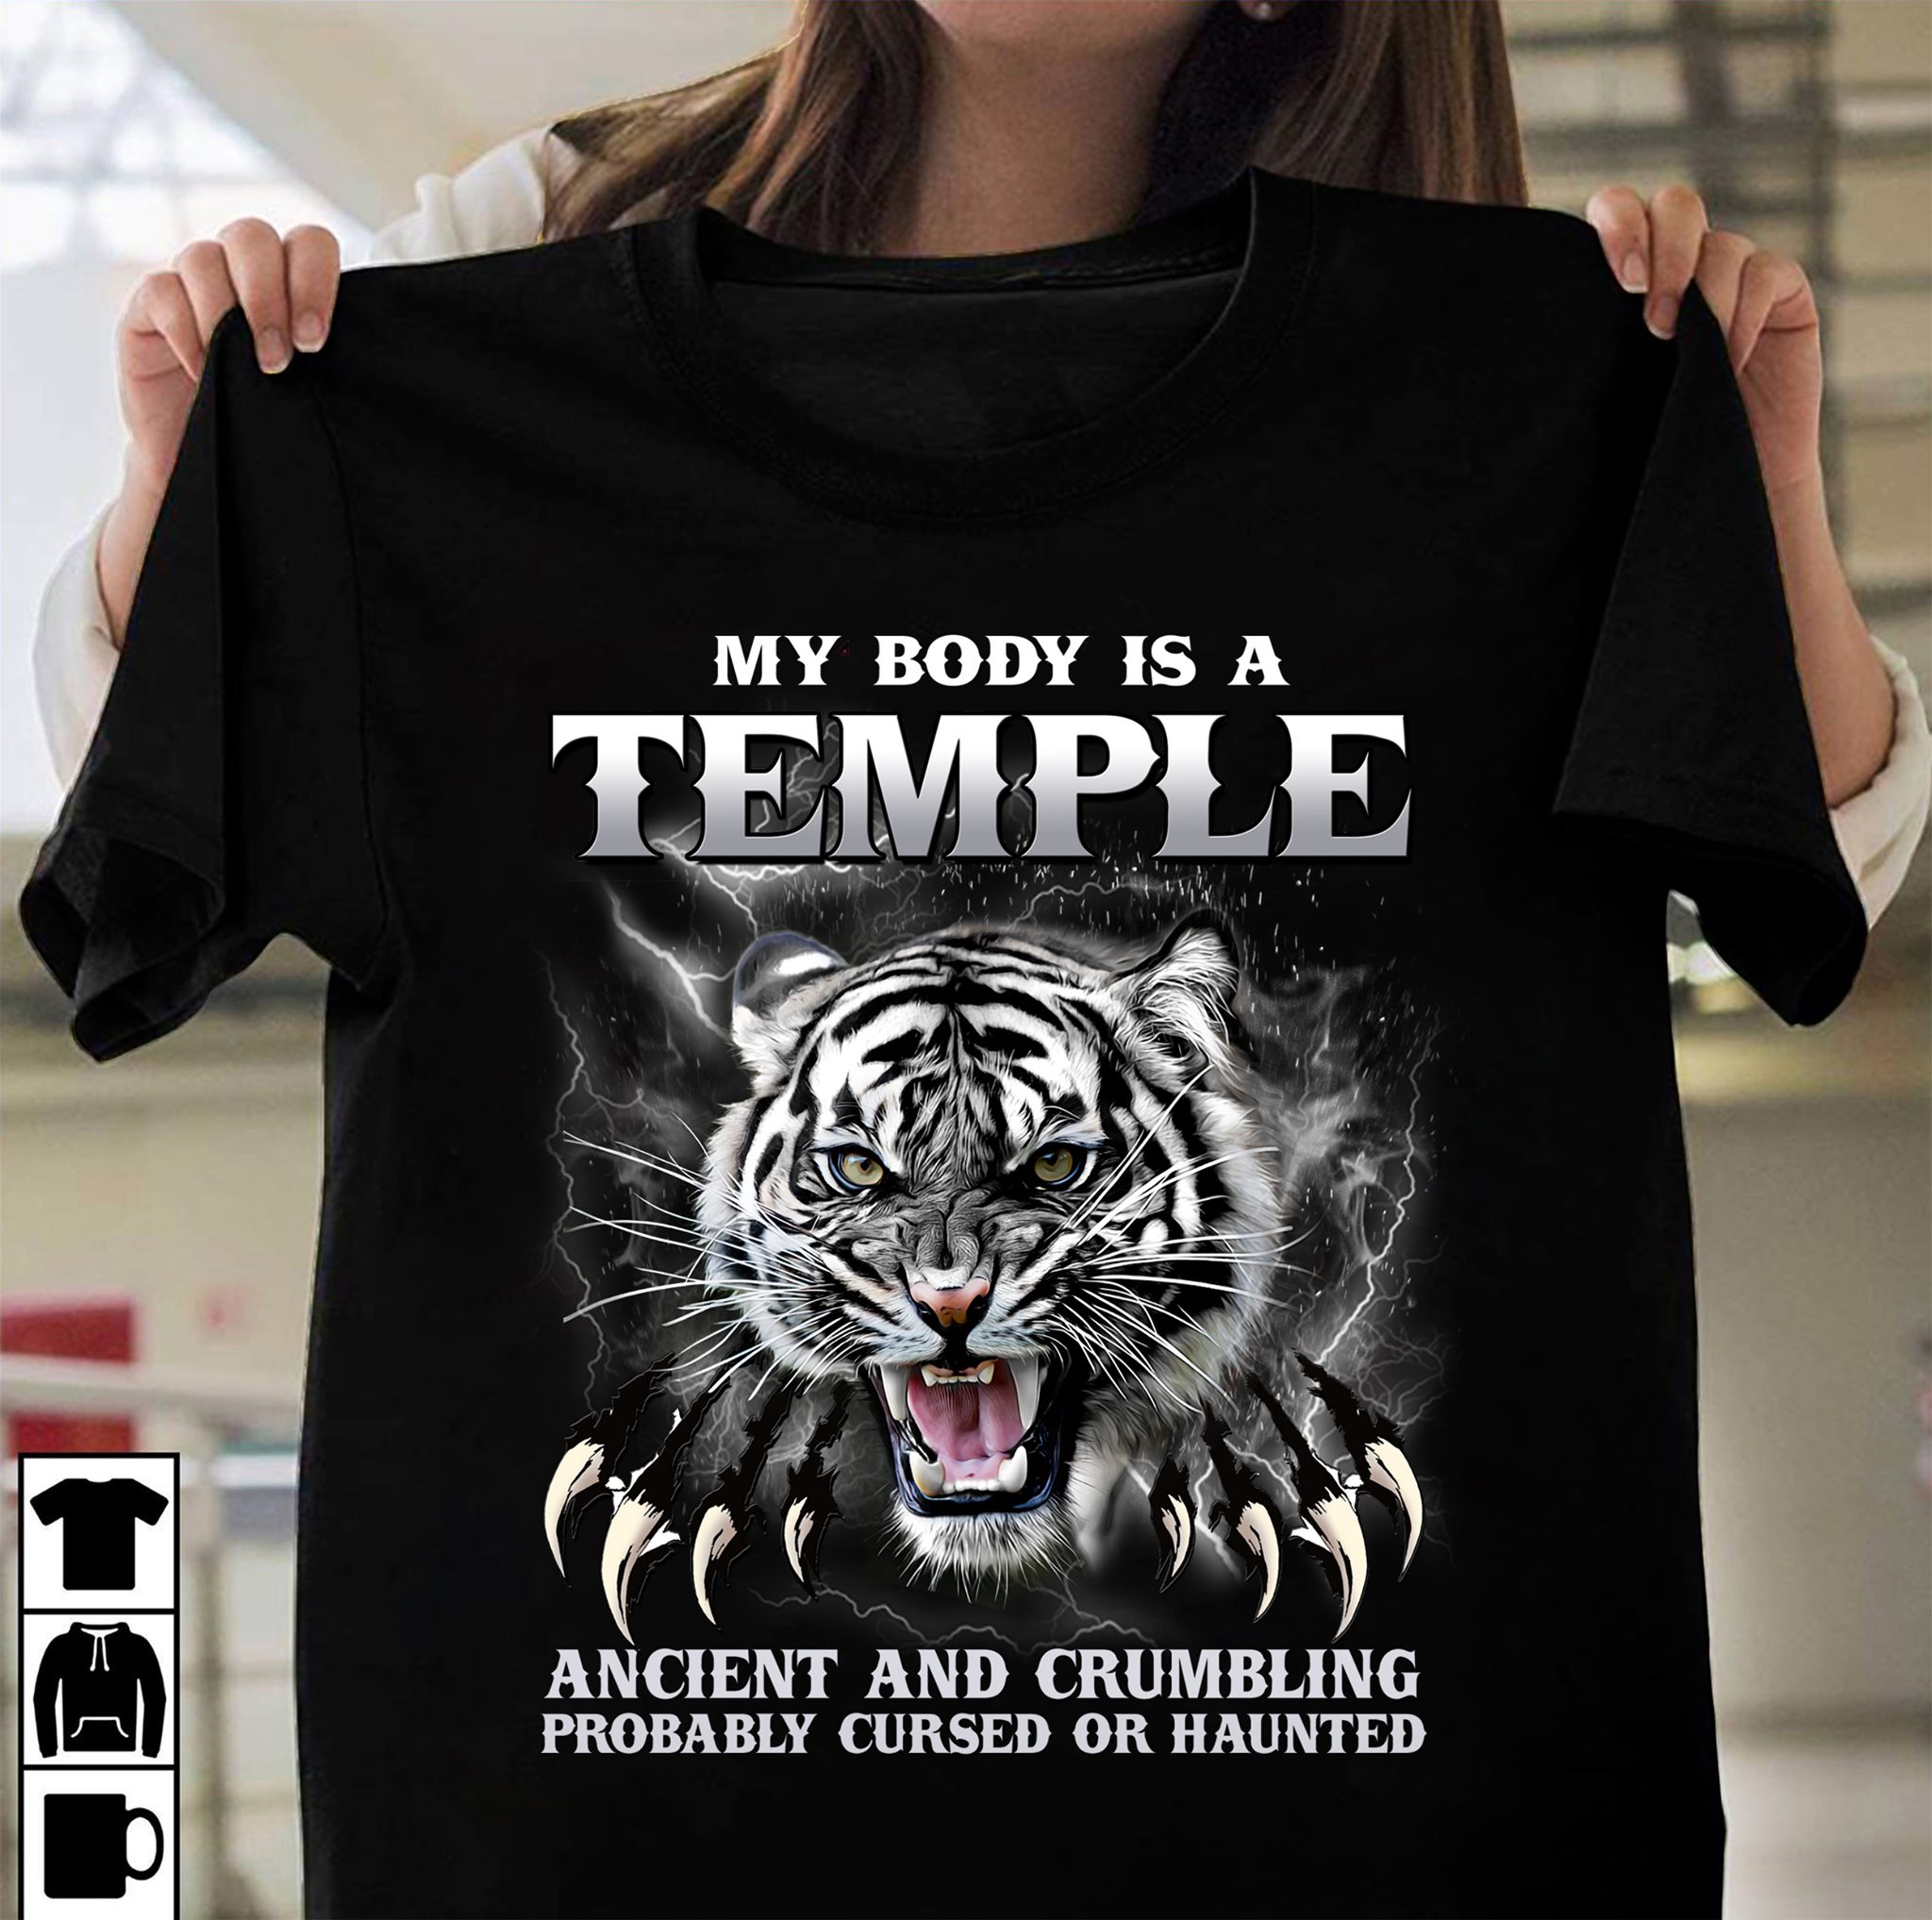 My body is a temple ancient and crumbling probably cursed or haunted - Angry tiger